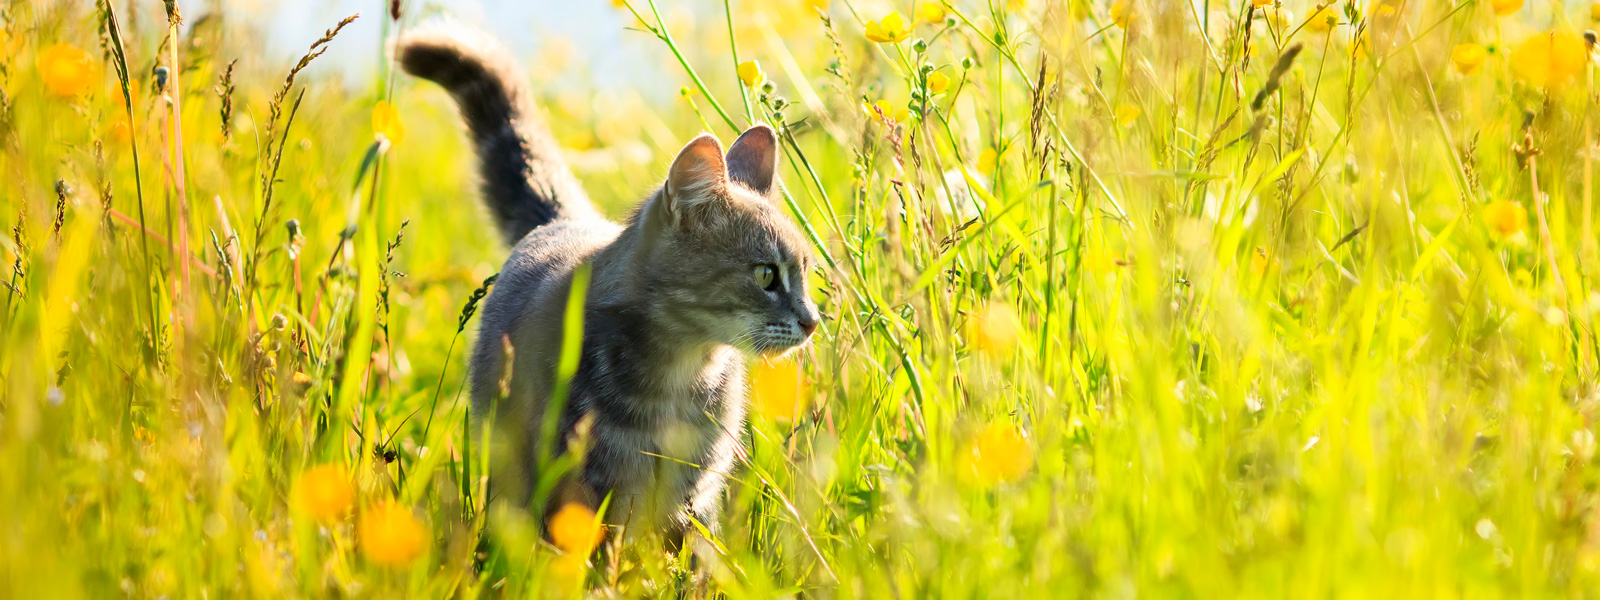 A cat stands on a meadow in the bright sunshine.